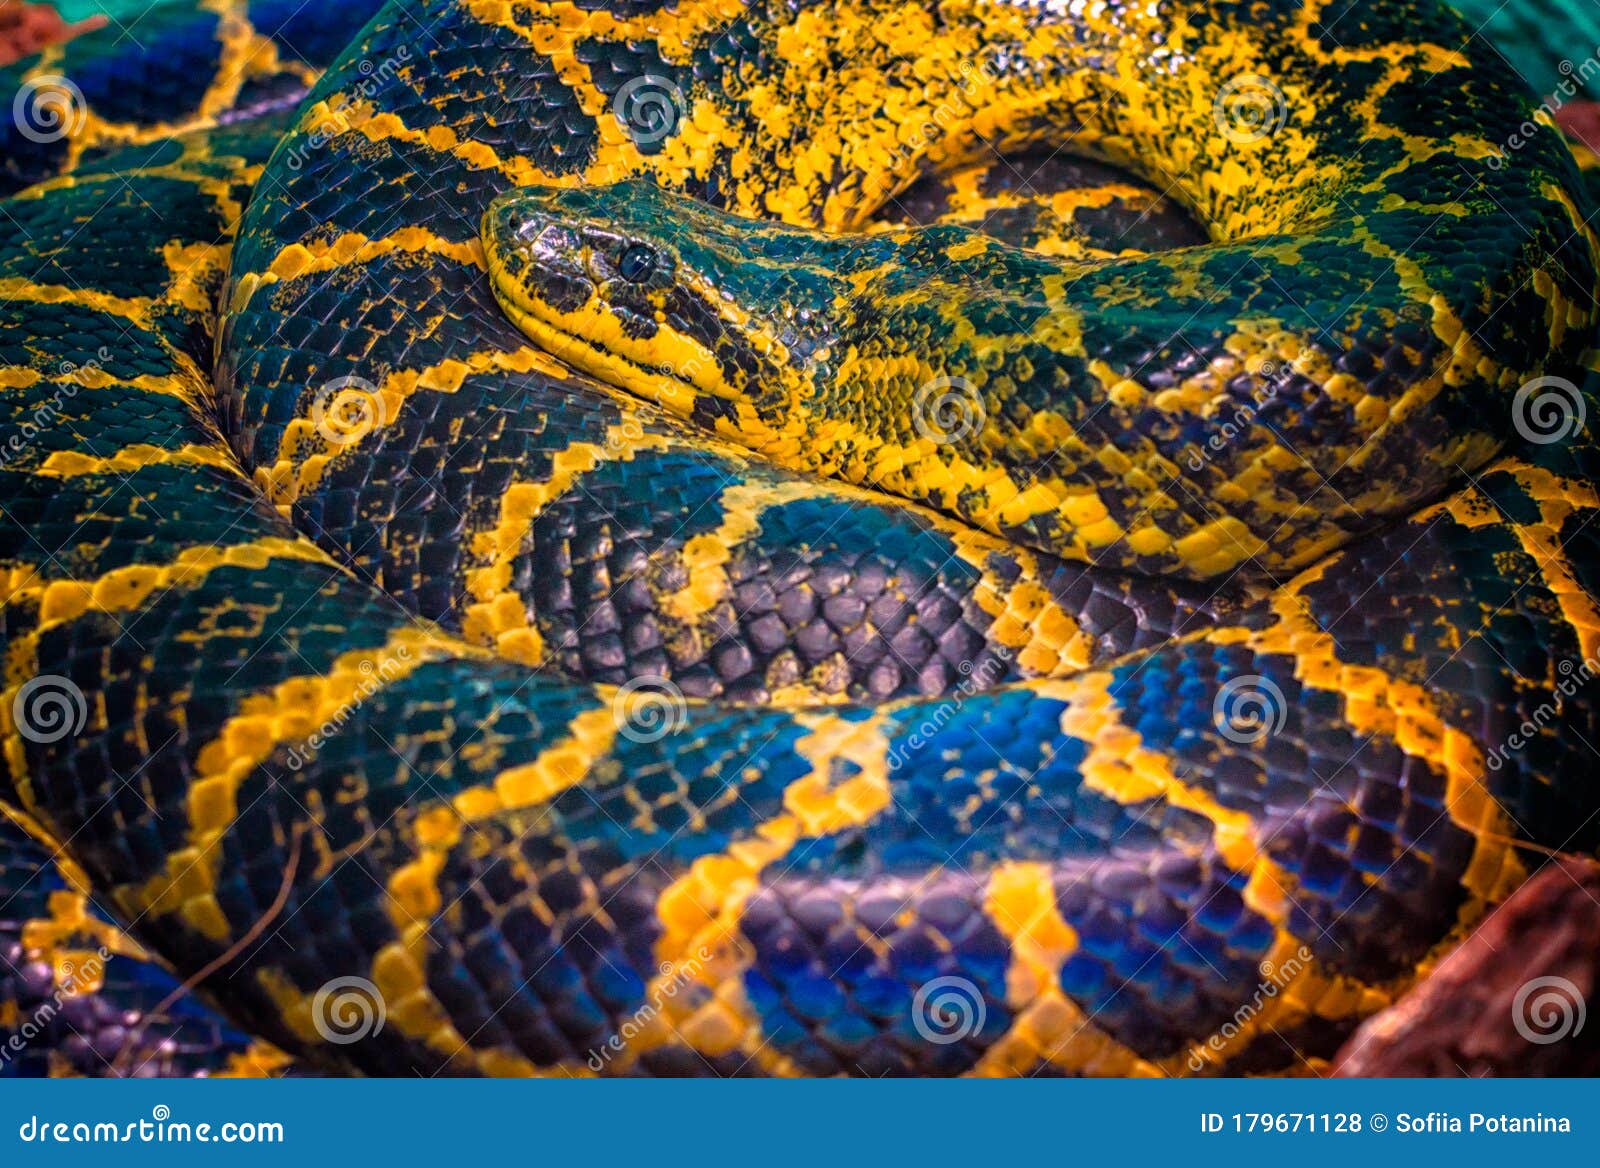 paraguayan south or yellow anaconda is ringed by a ring